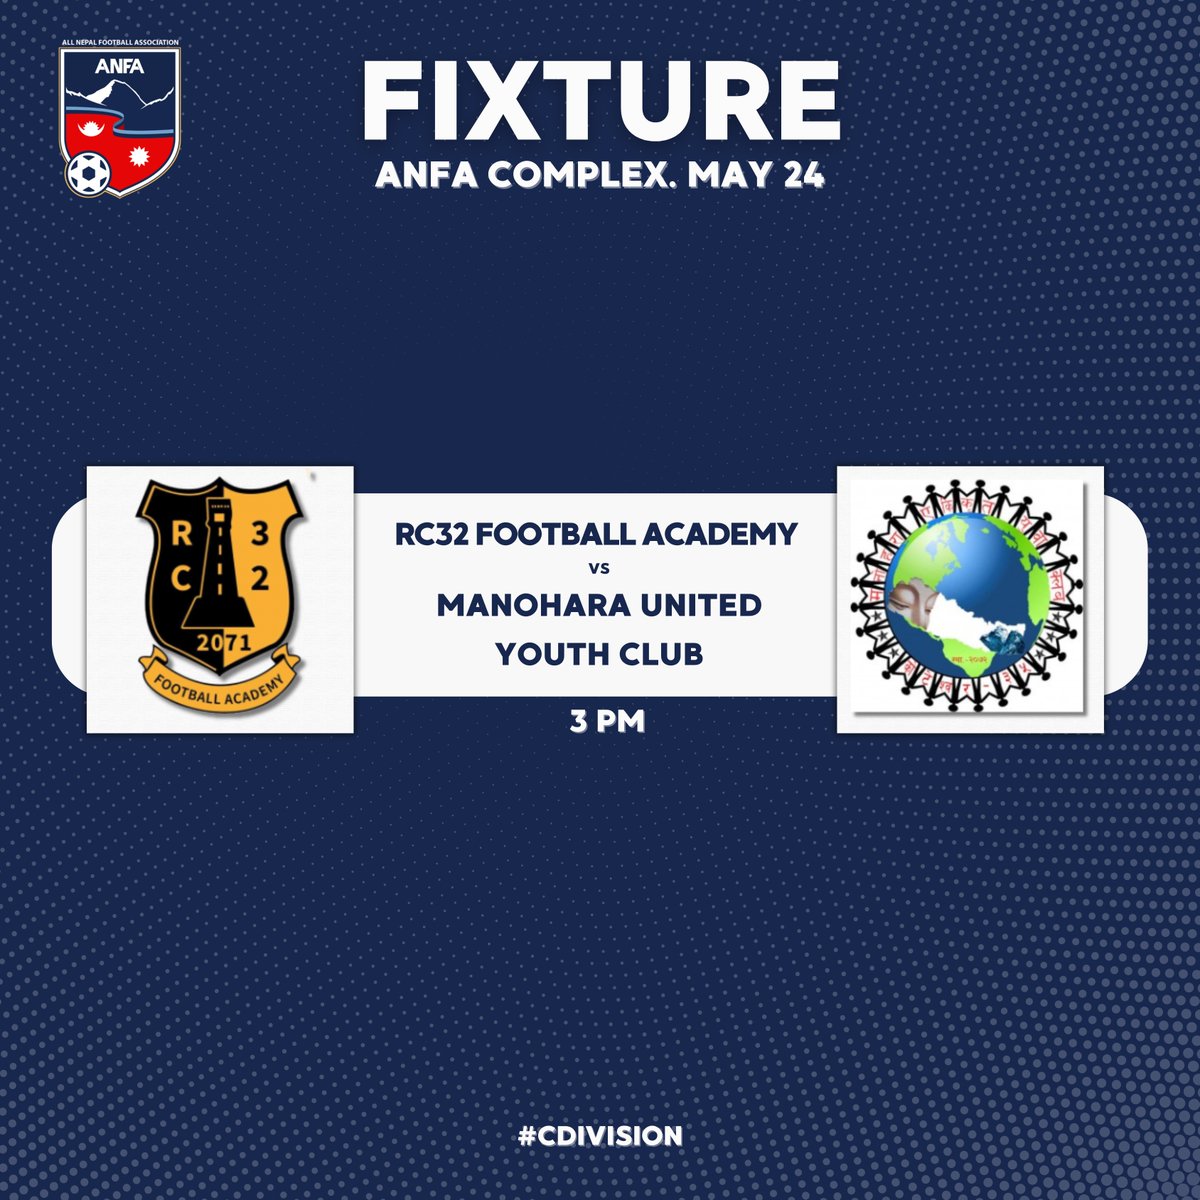 We begin the 10th round of #CDivision with one fixture at 3 pm. #ANFA